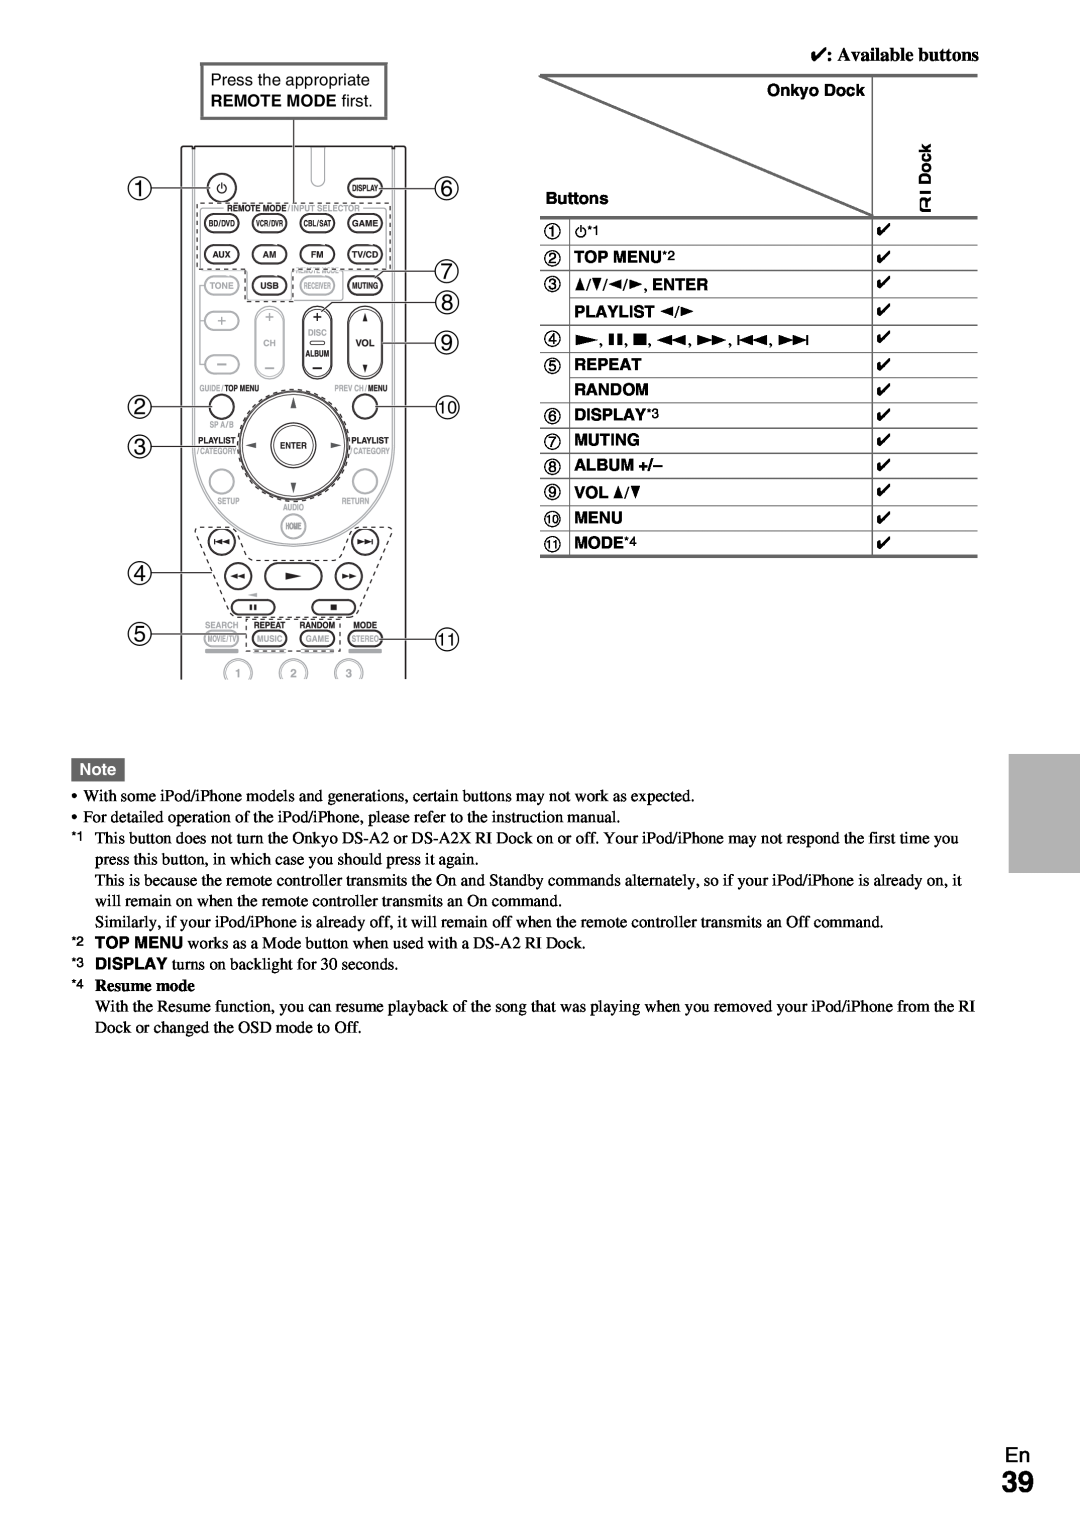 Onkyo HT-RC330 instruction manual Available buttons 